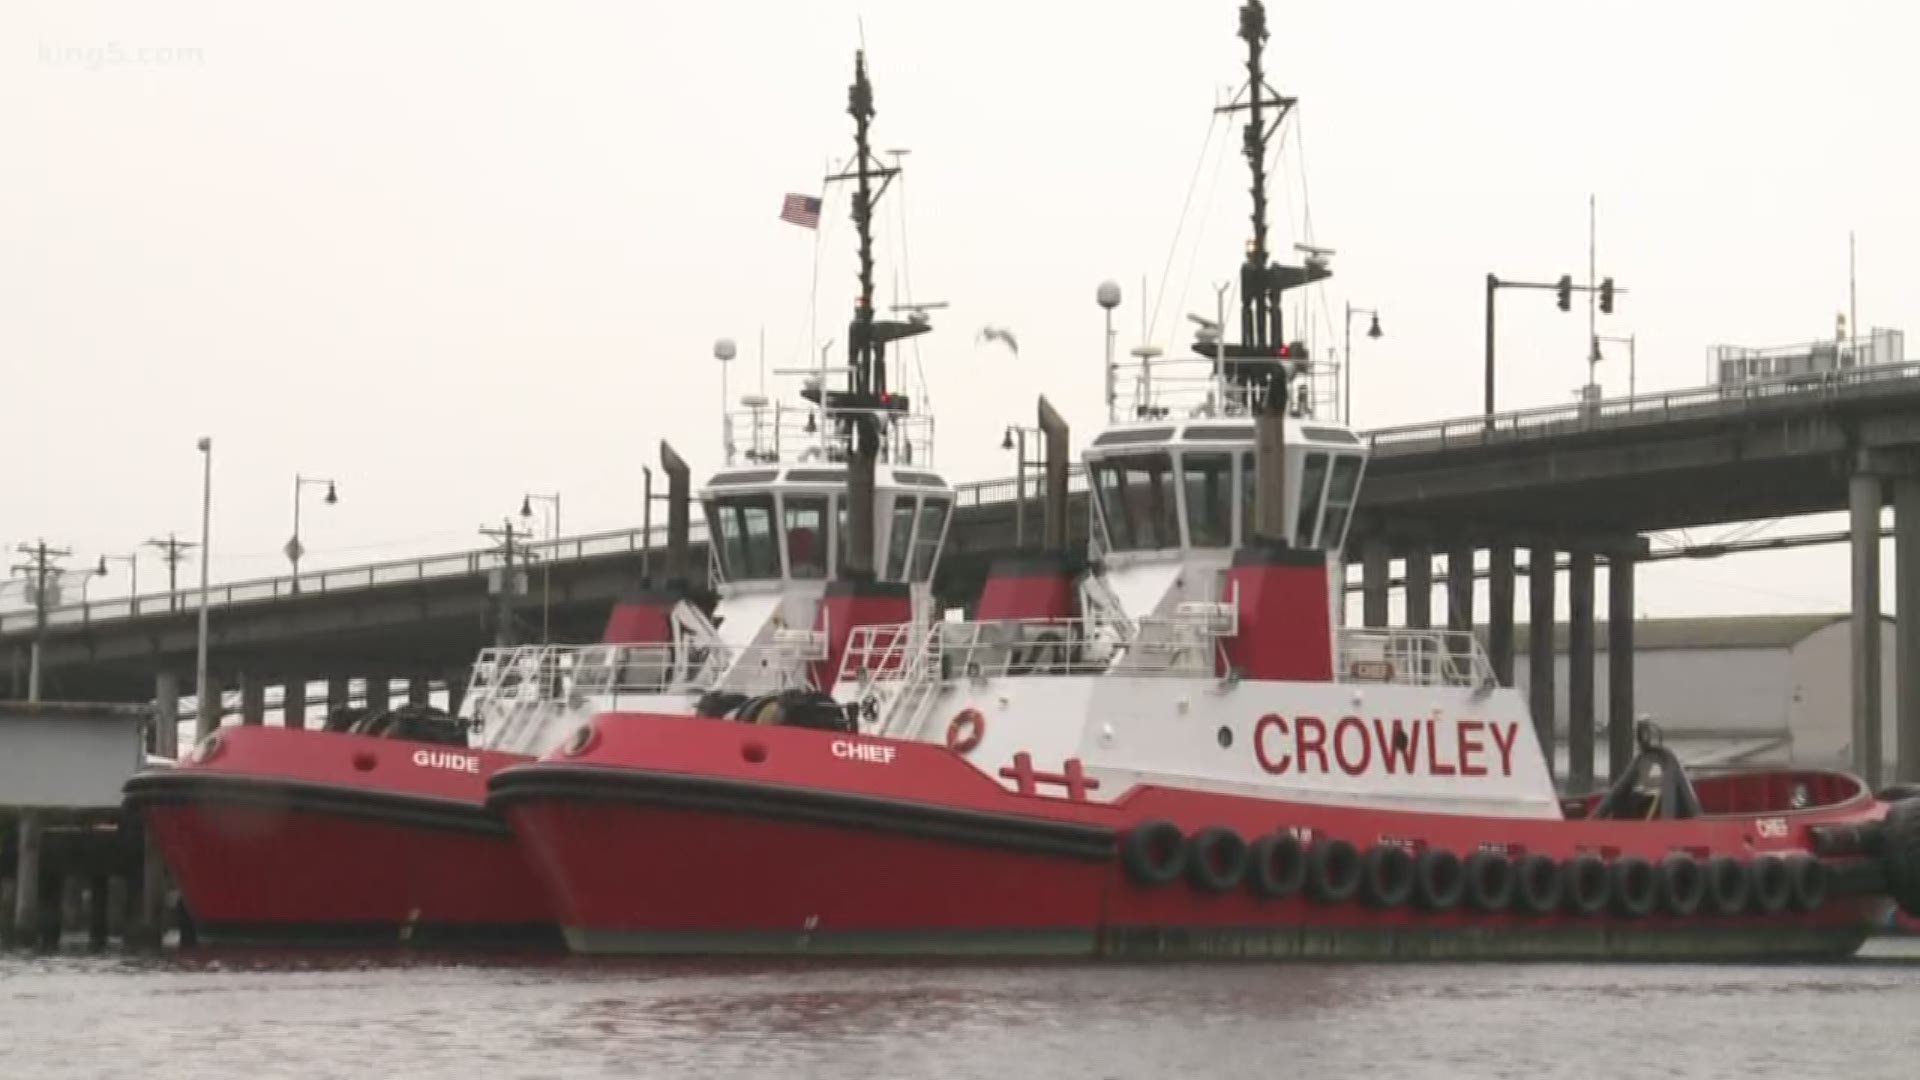 Tugboat companies are suing the EPA to stop a Washington state ruling that bans the dumping of raw sewage into Puget Sound area waterways. KING 5 Environmental Reporter Alison Morrow has the details.